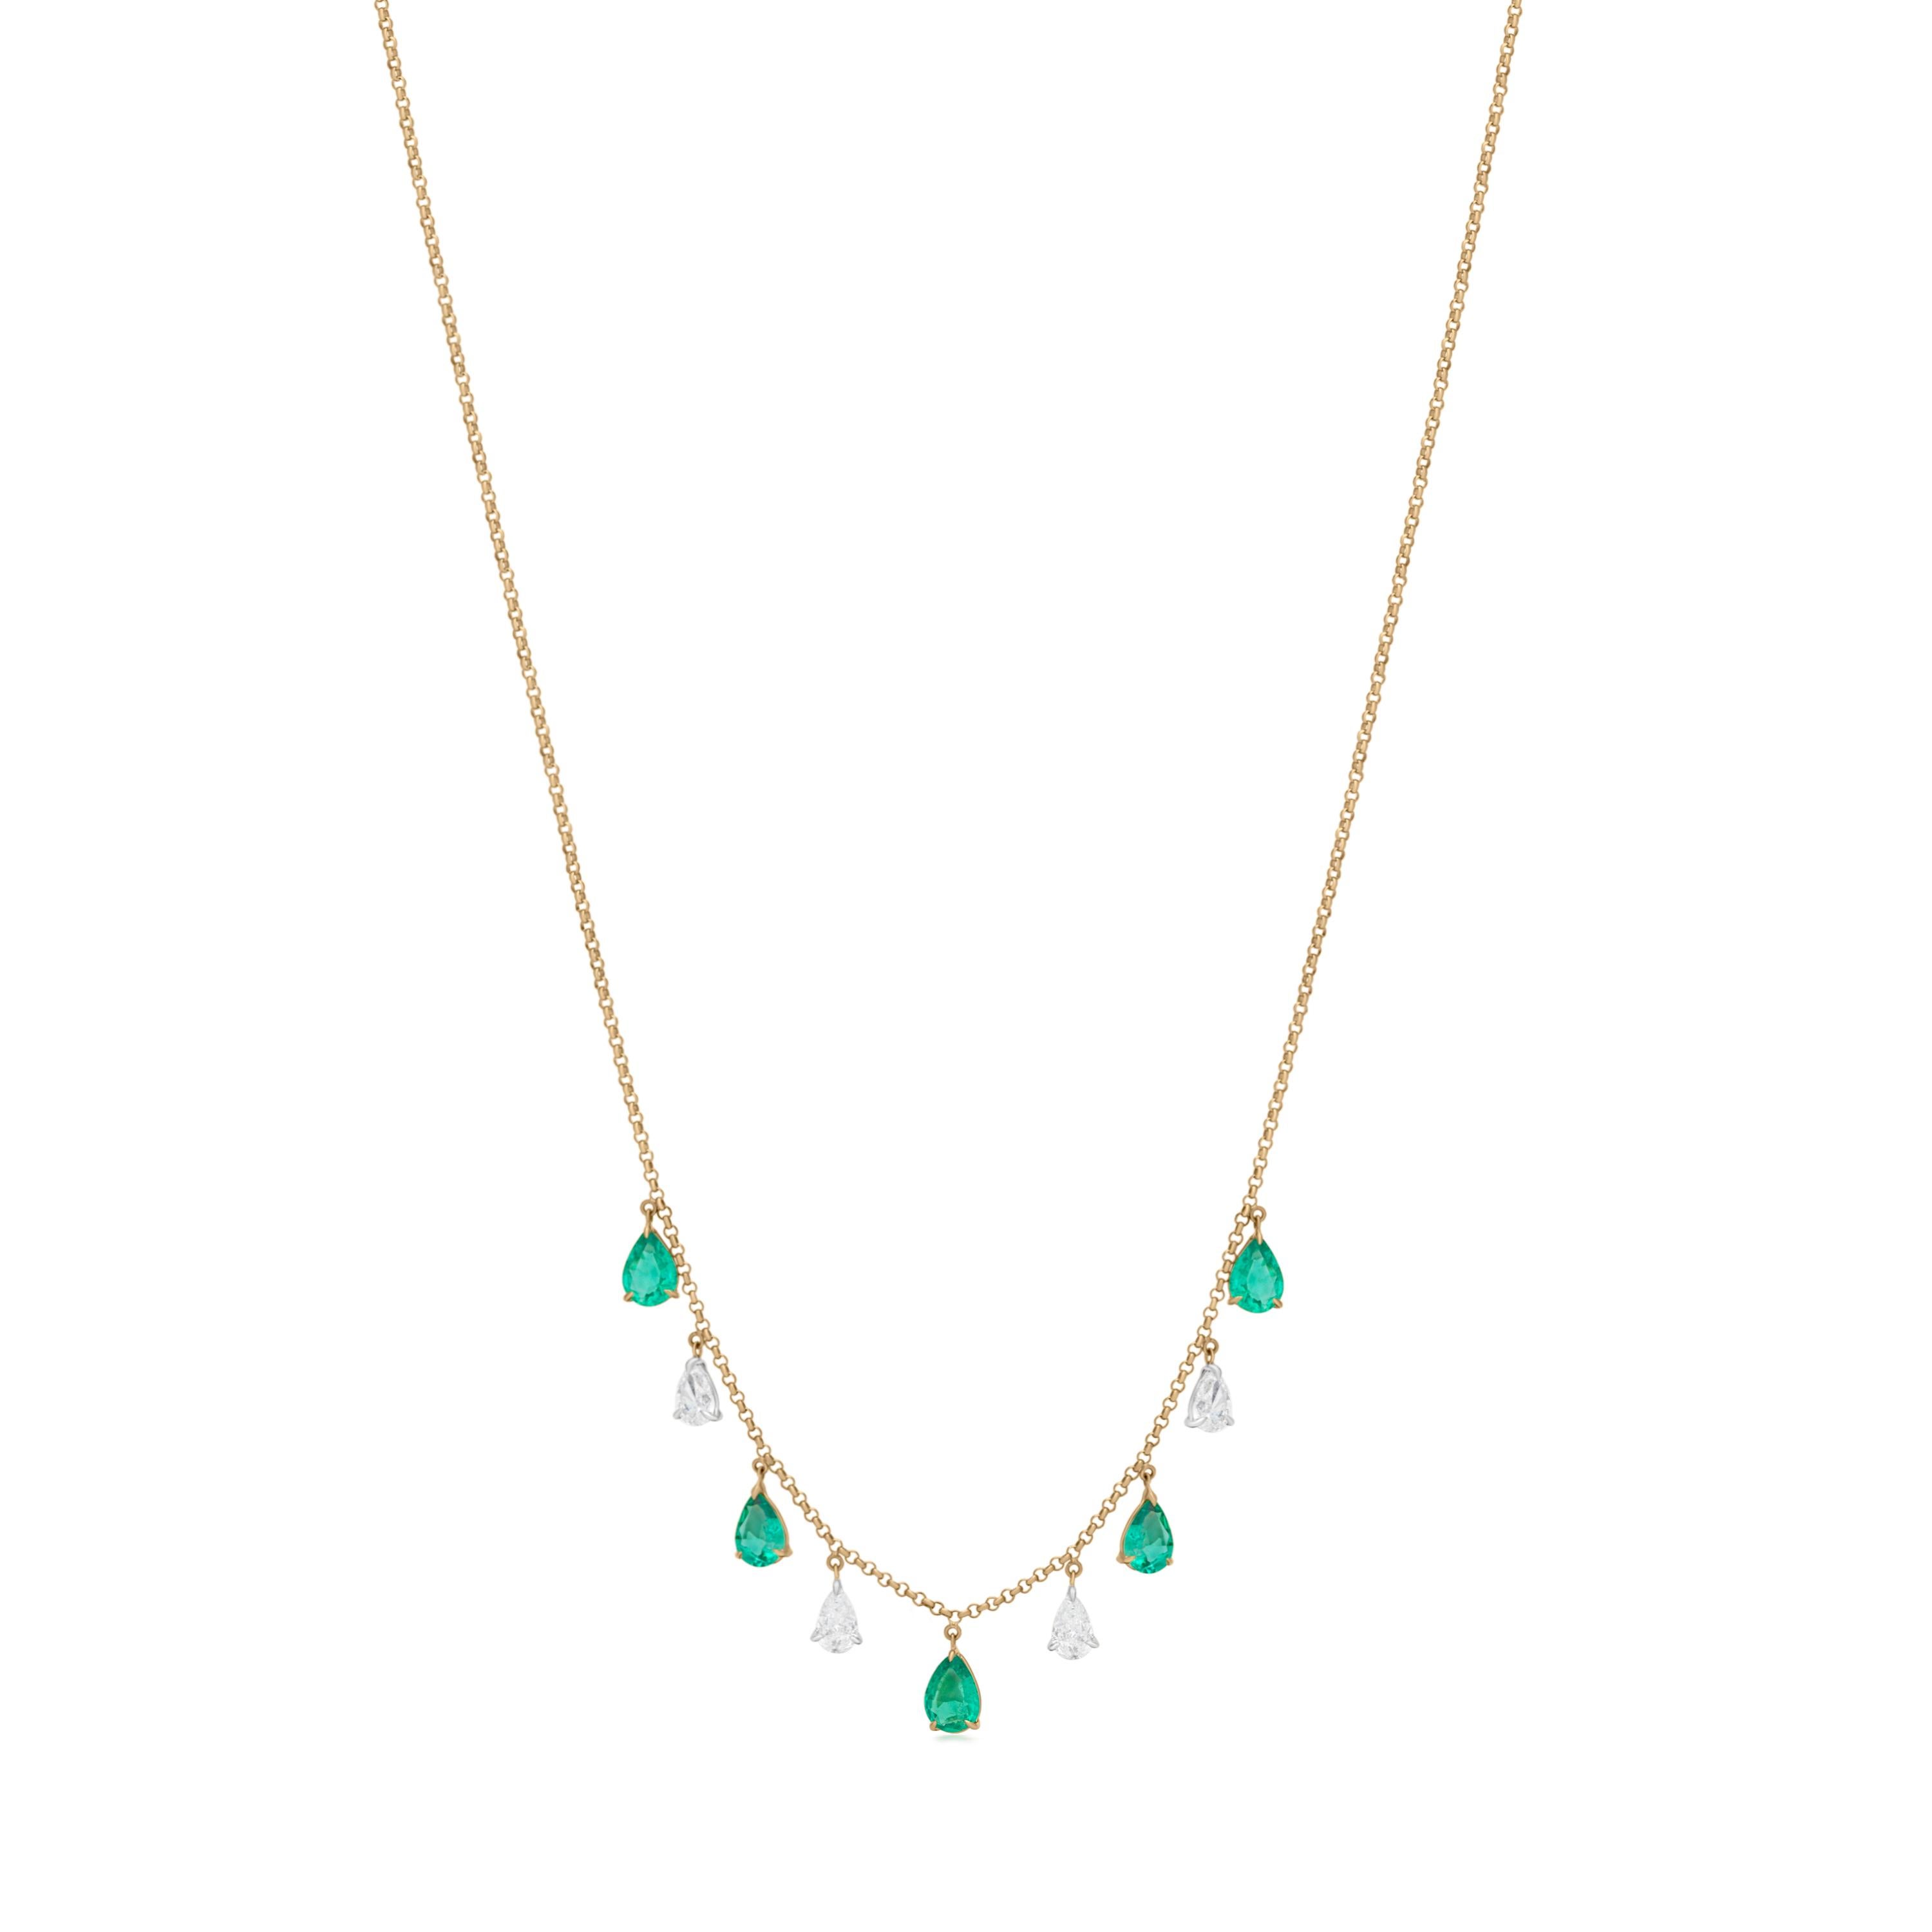 This Nigaam Pear Emerald and Diamond Drop Necklace in 18K Yellow Gold features alternating drops of 2.46 carats pear emerald and 1 carts pear diamond drops hanging from a rolo chain of 18k Yellow gold. This 18